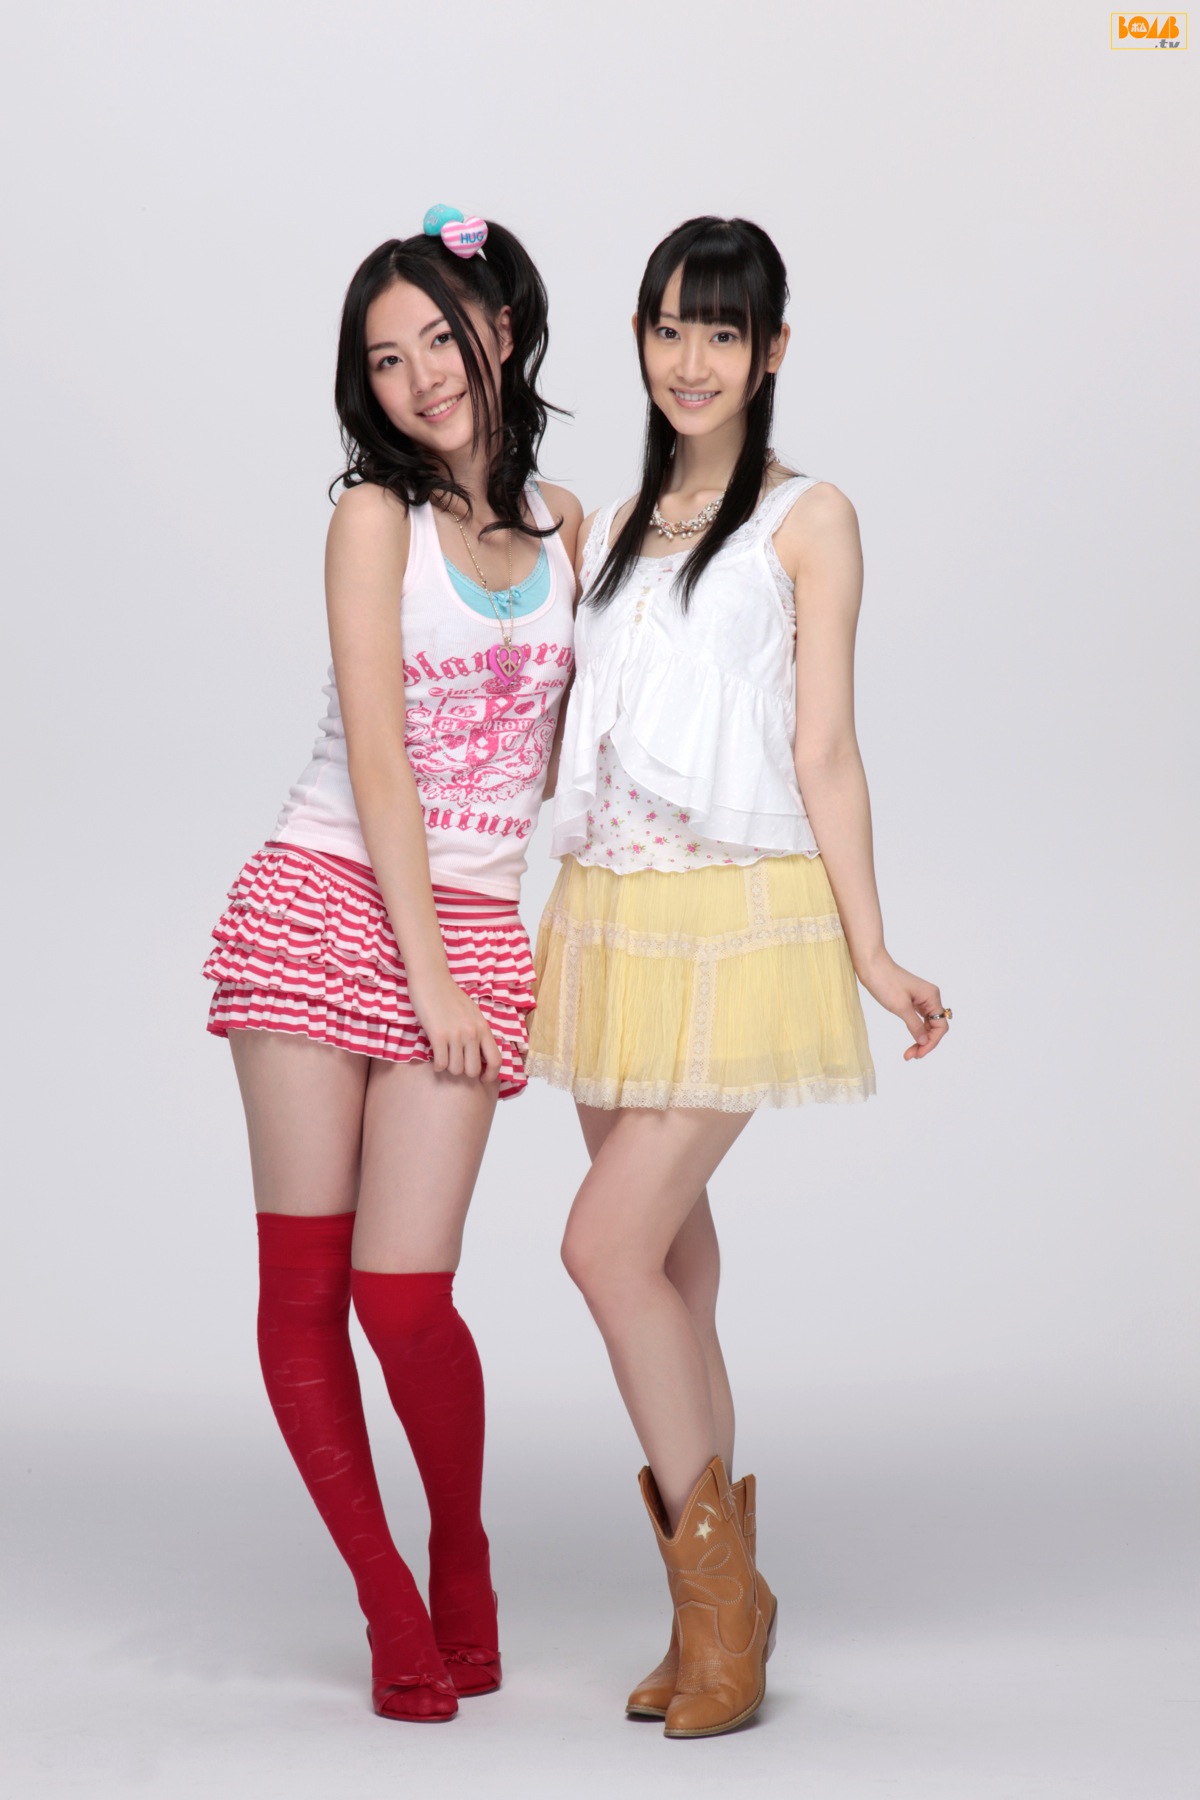 [Bomb.TV] March 2011 issue SKE48 Page 27 No.8030b6